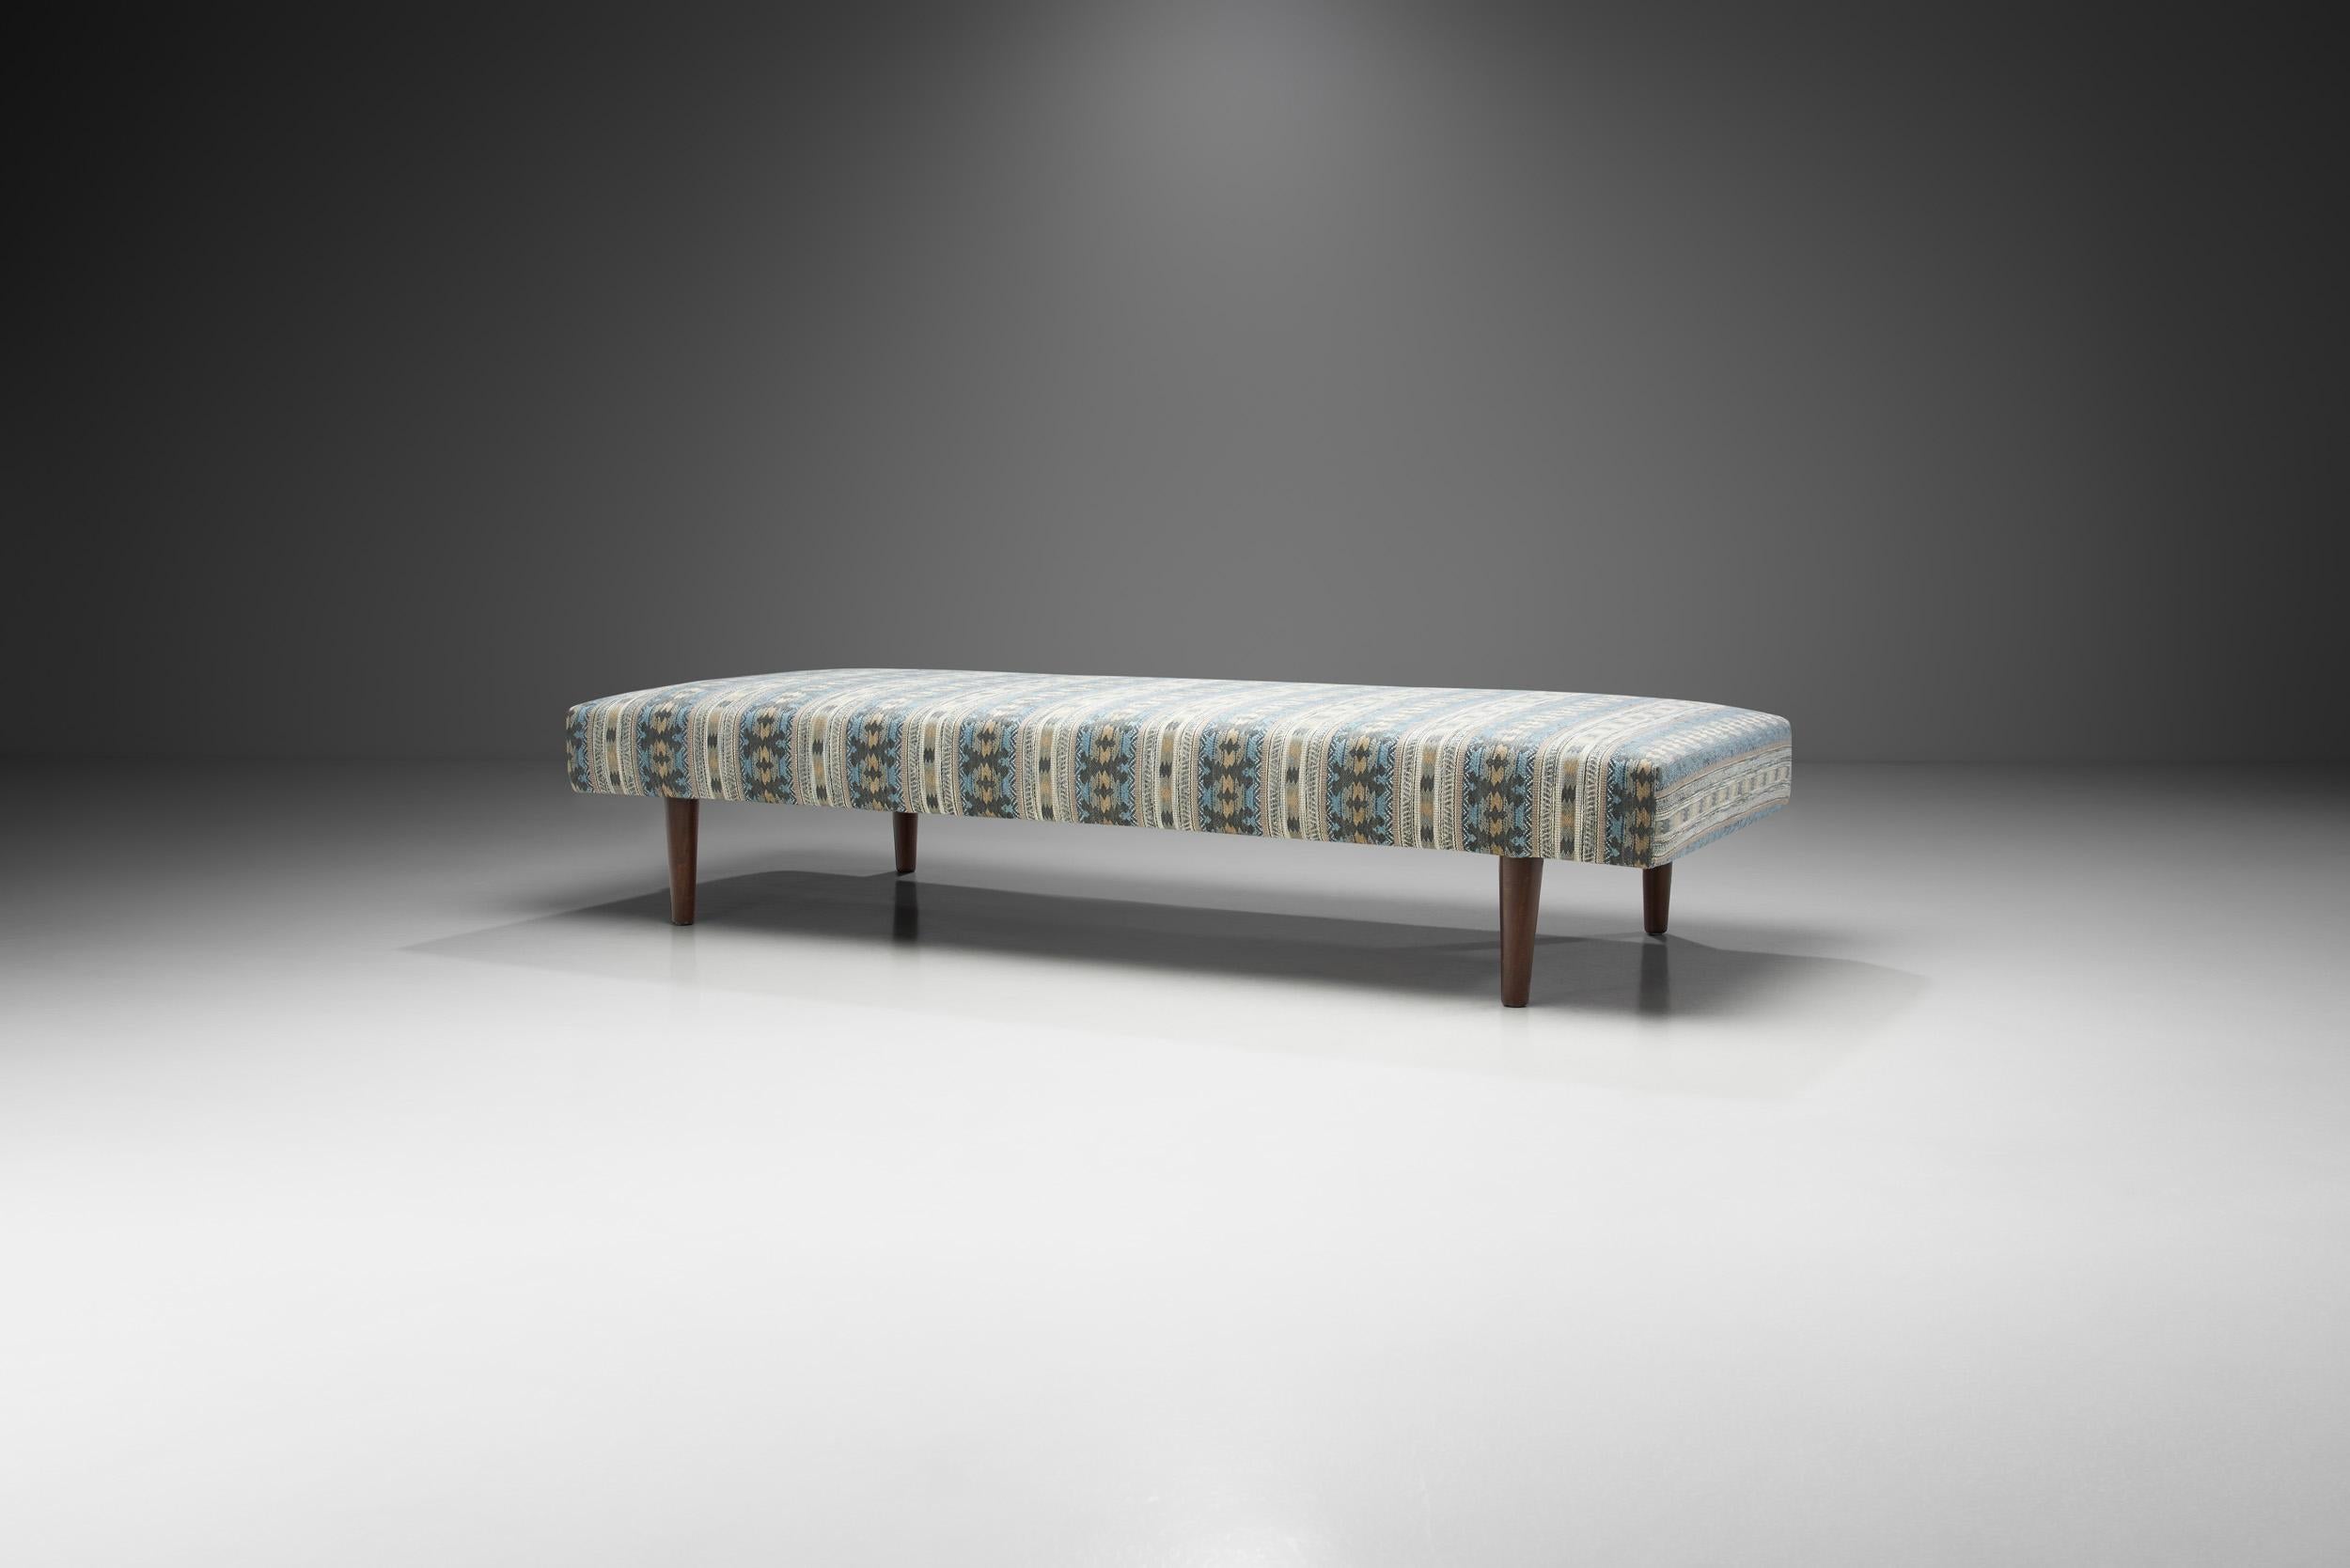 The term “daybed” traditionally applied to sofas and chaise lounges used for socializing during the day. Modern daybeds can be used in much the same way, so the term is now used to describe these bed frames. Many European designers tried their hands